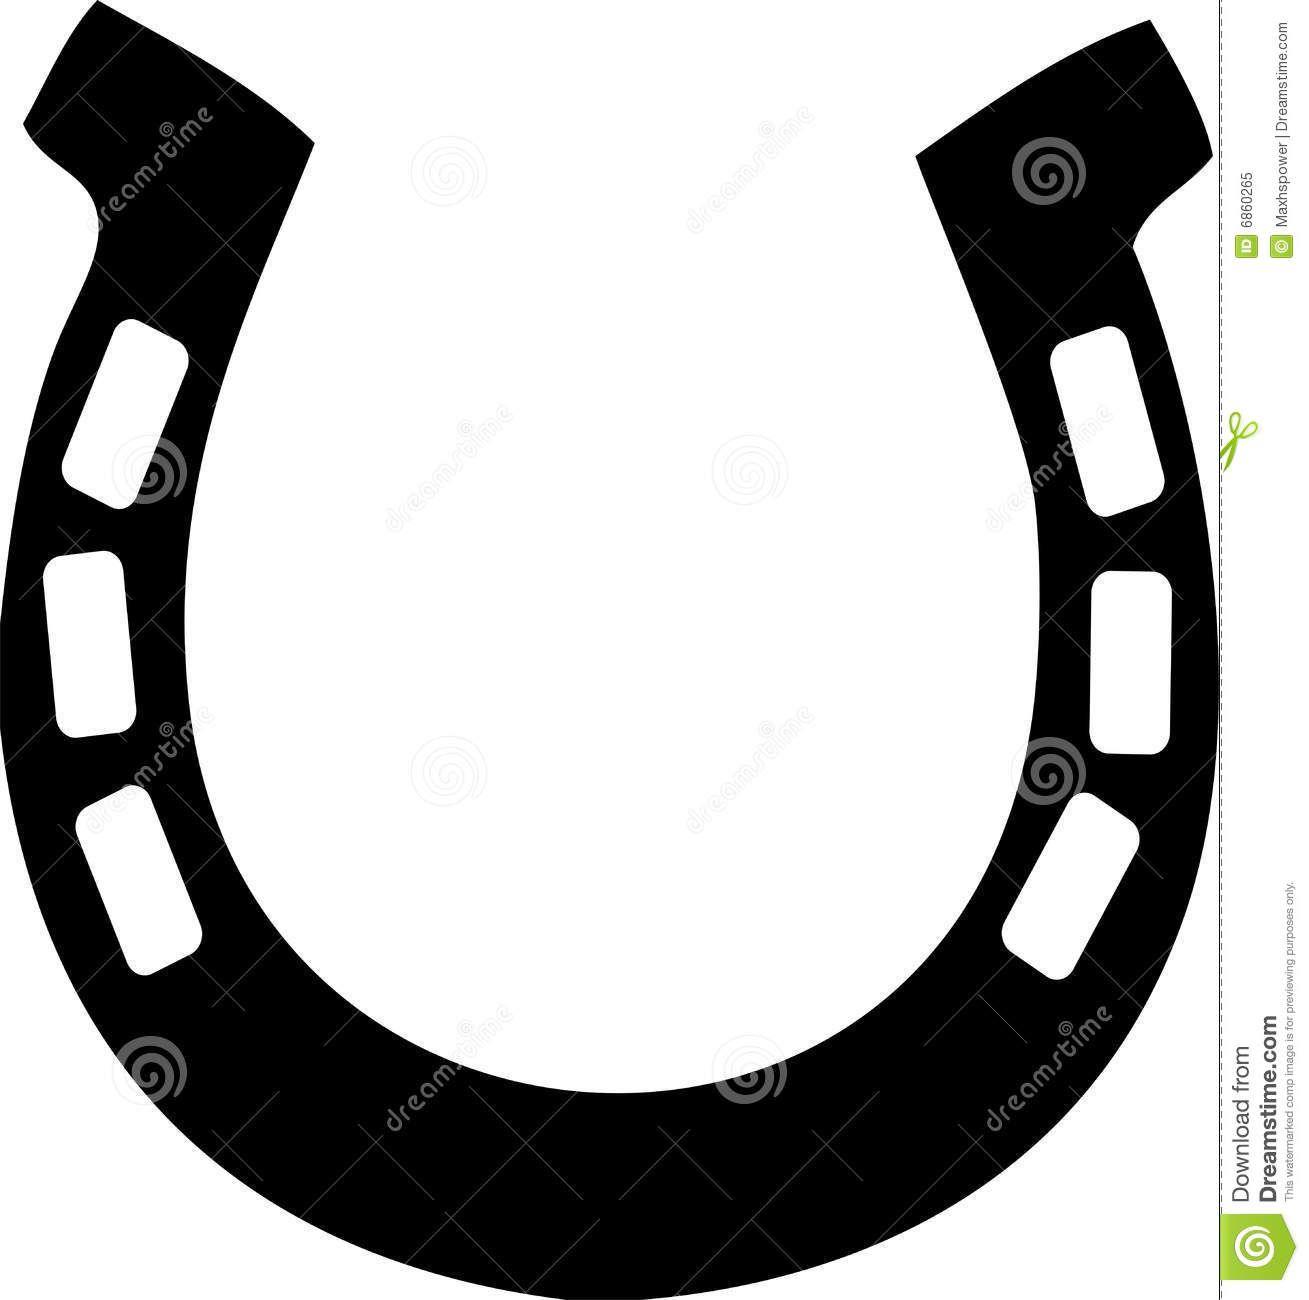 Lucky Horse Shoe Logo - Lucky horseshoe image transparent download - RR collections